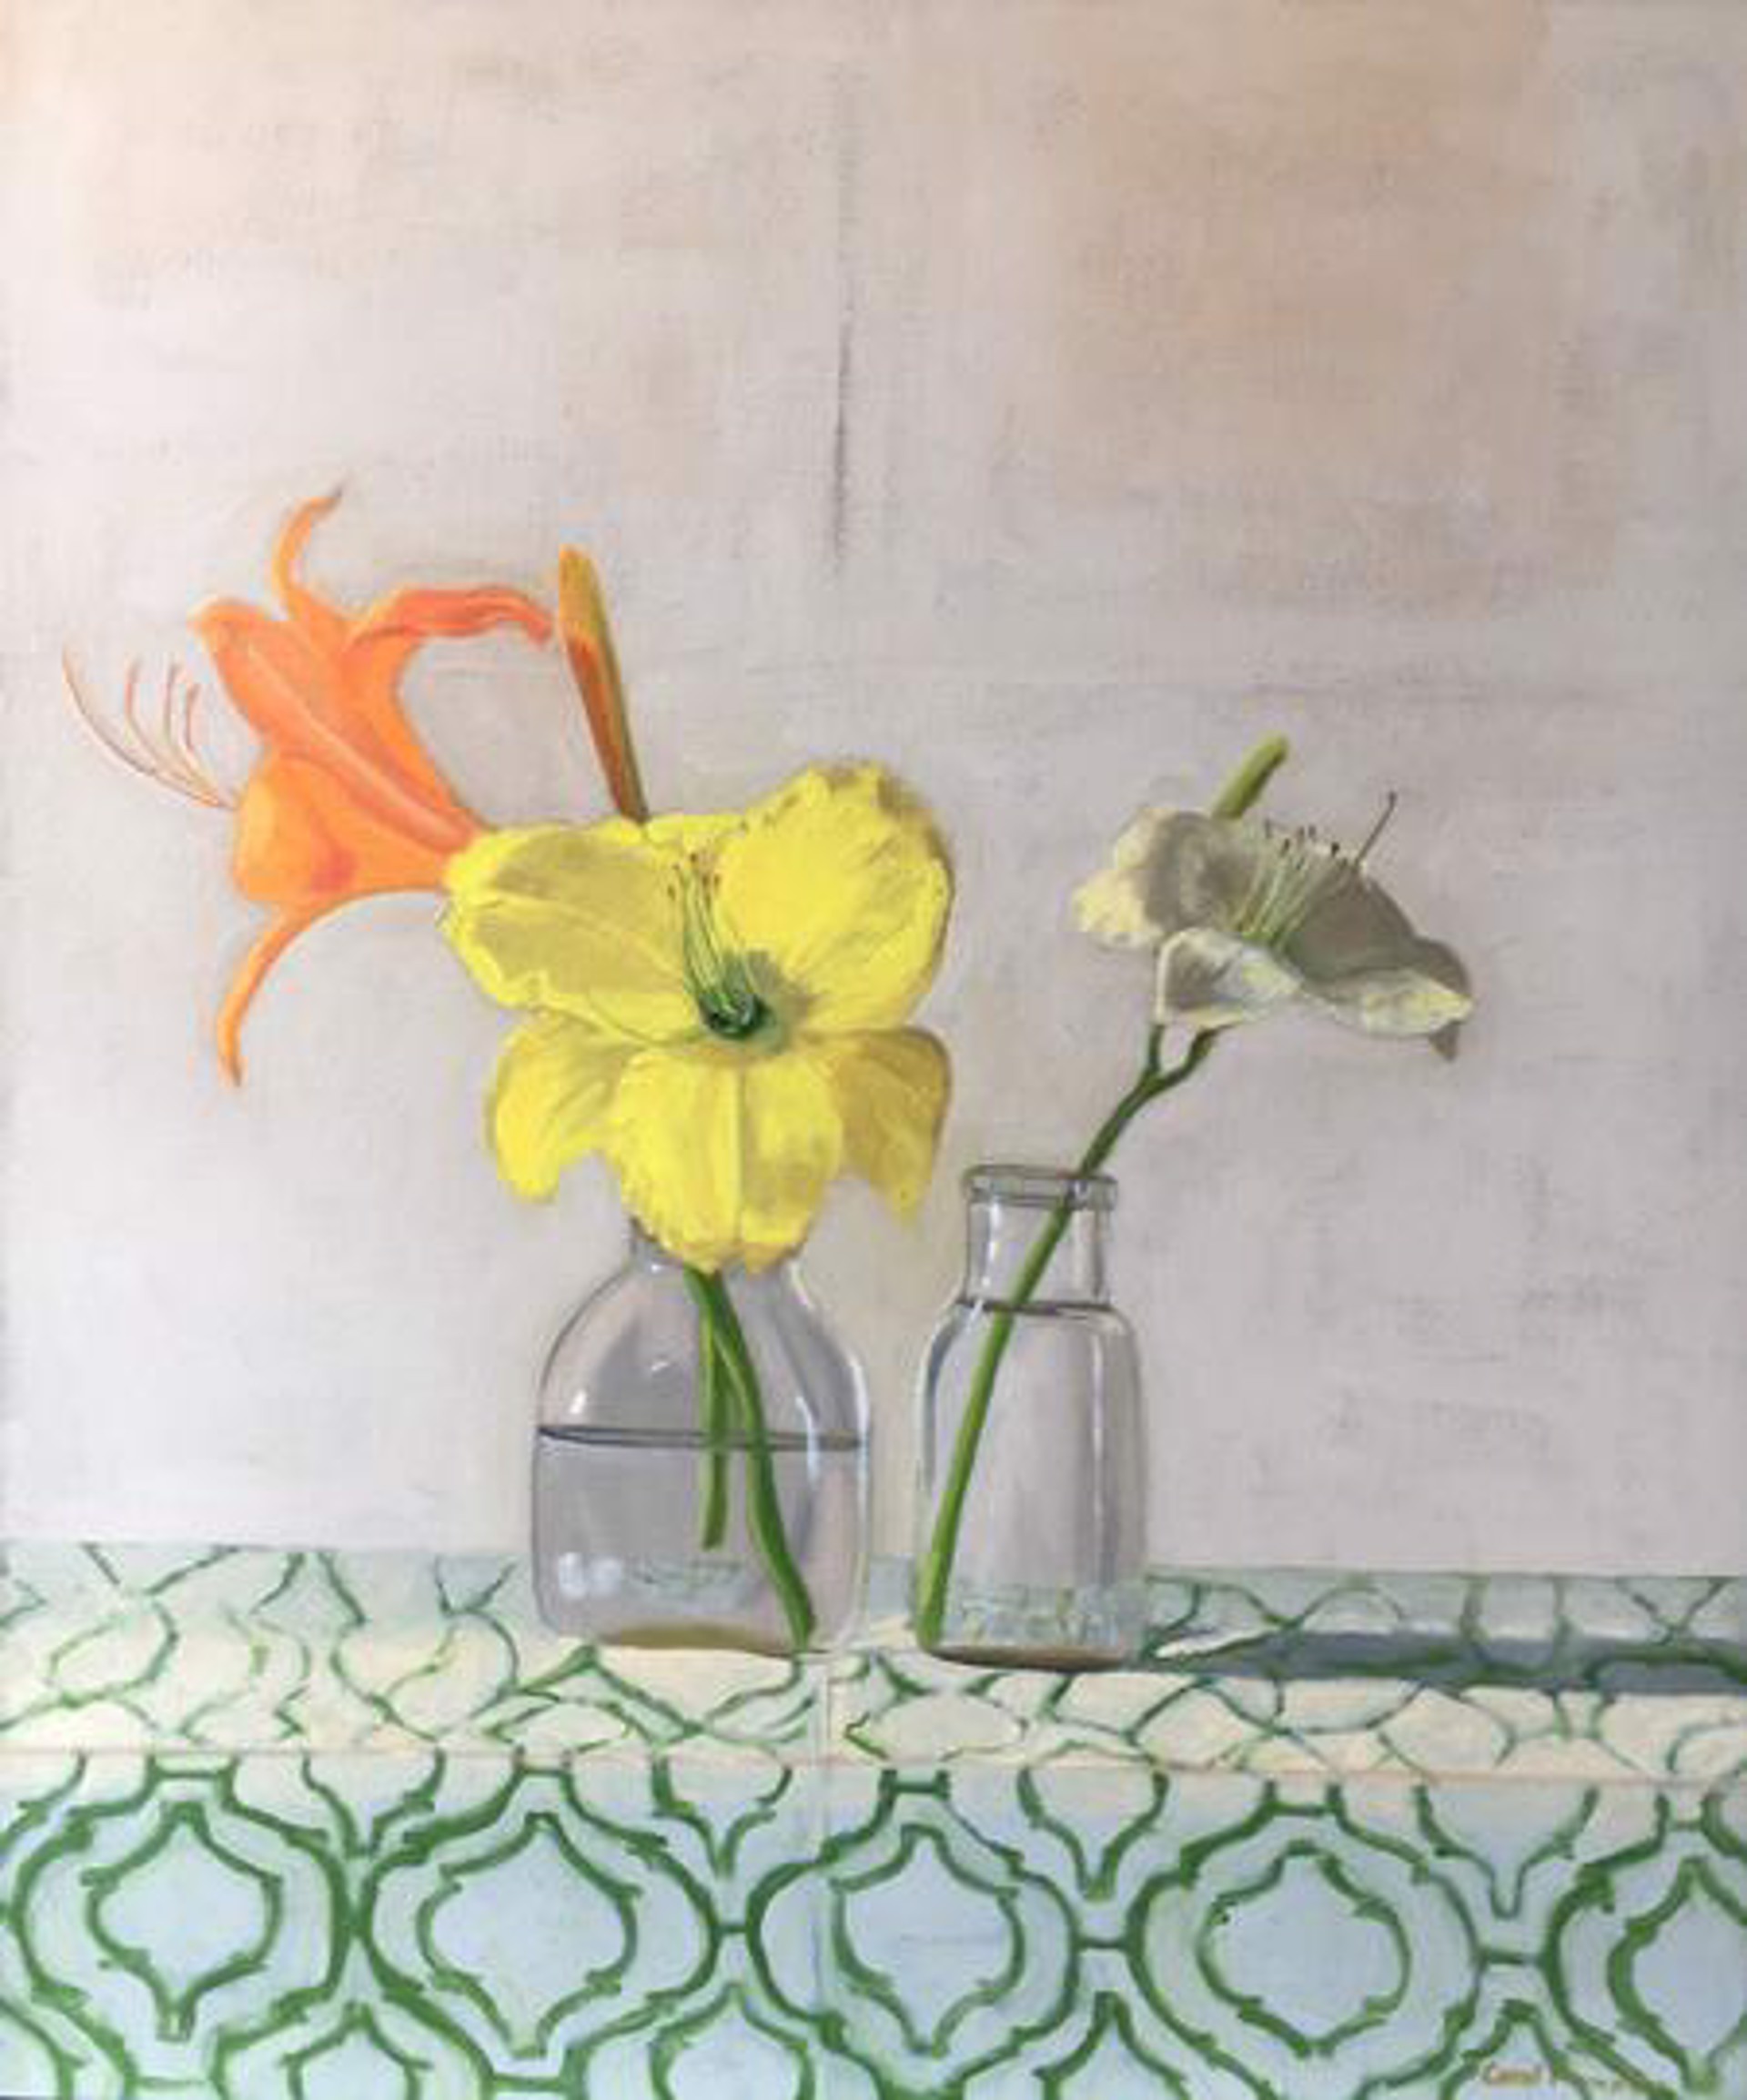 Lily on Green and White Tablecloth by Carol Thompson